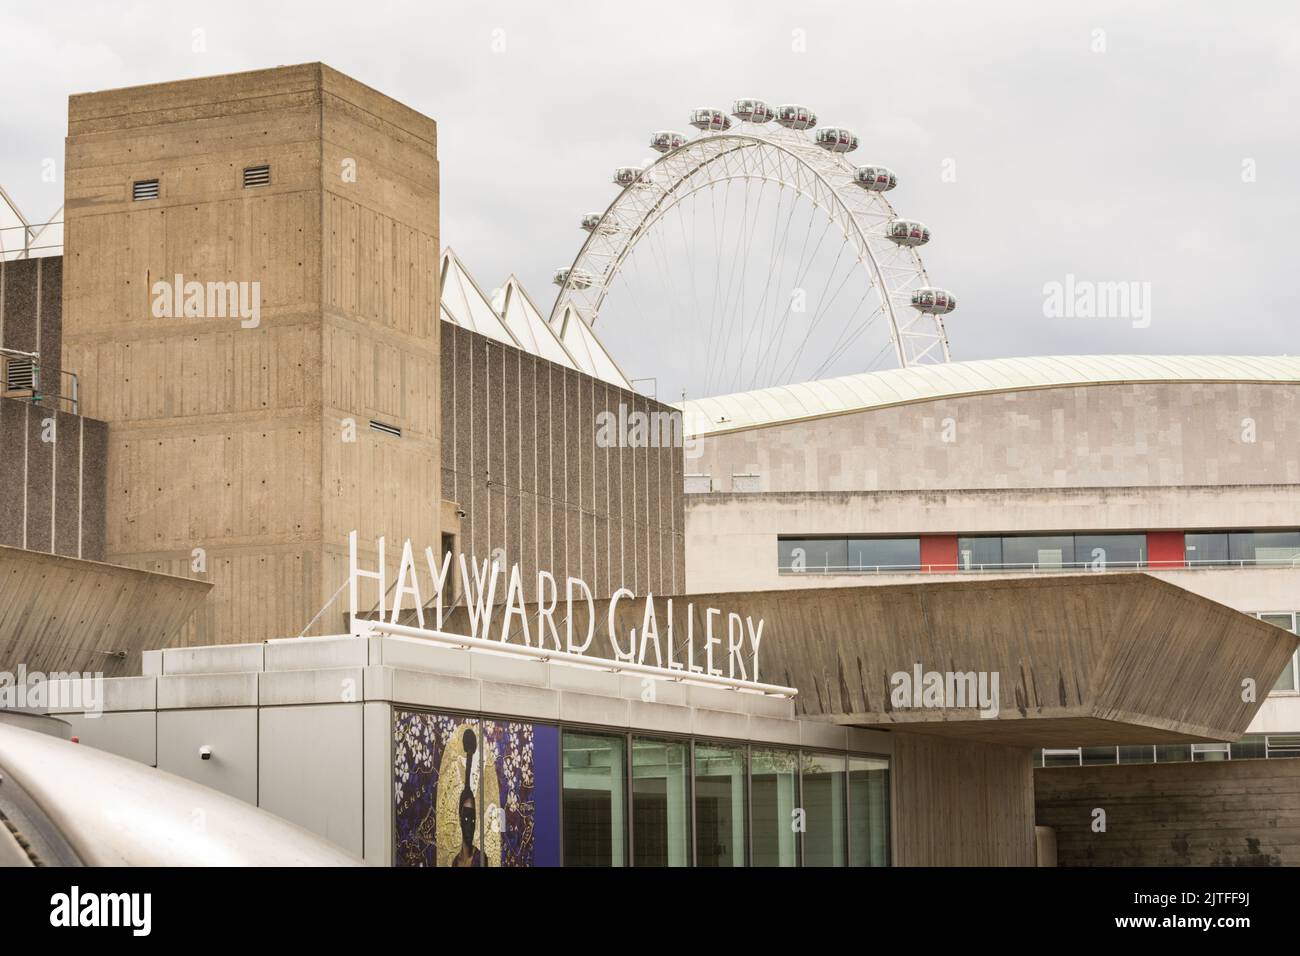 The Hayward Gallery and the Millenium Wheel (London Eye), Southbank Centre, Belvedere Road, London, SE1, England, UK Stock Photo